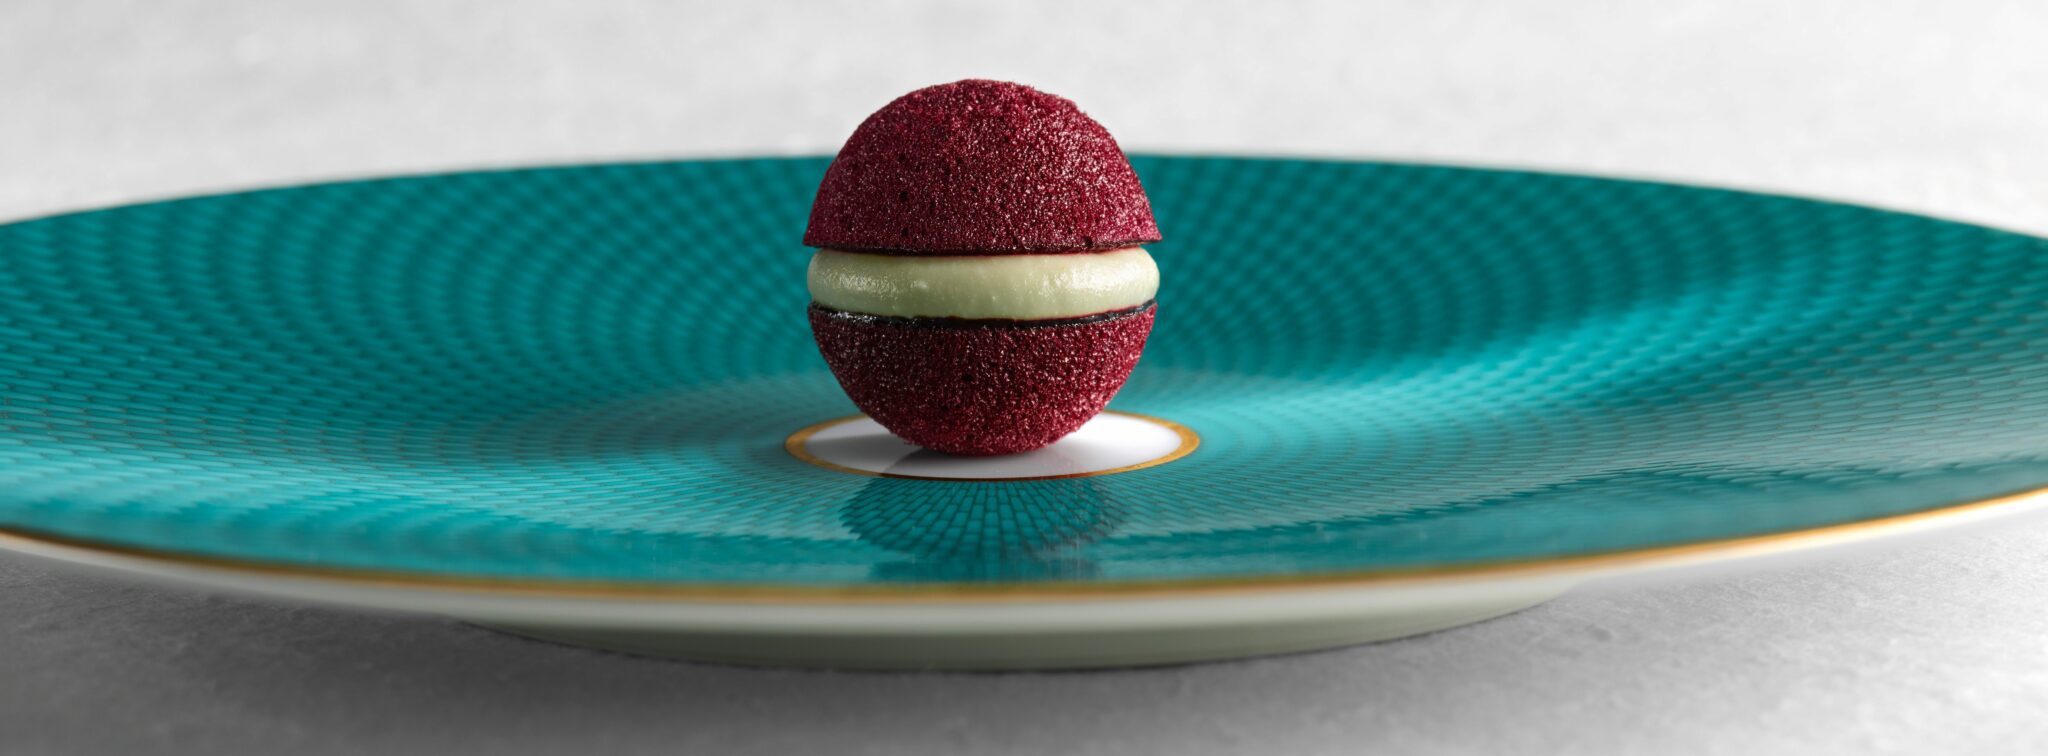 Image of a red velvet dessert presented on a plate